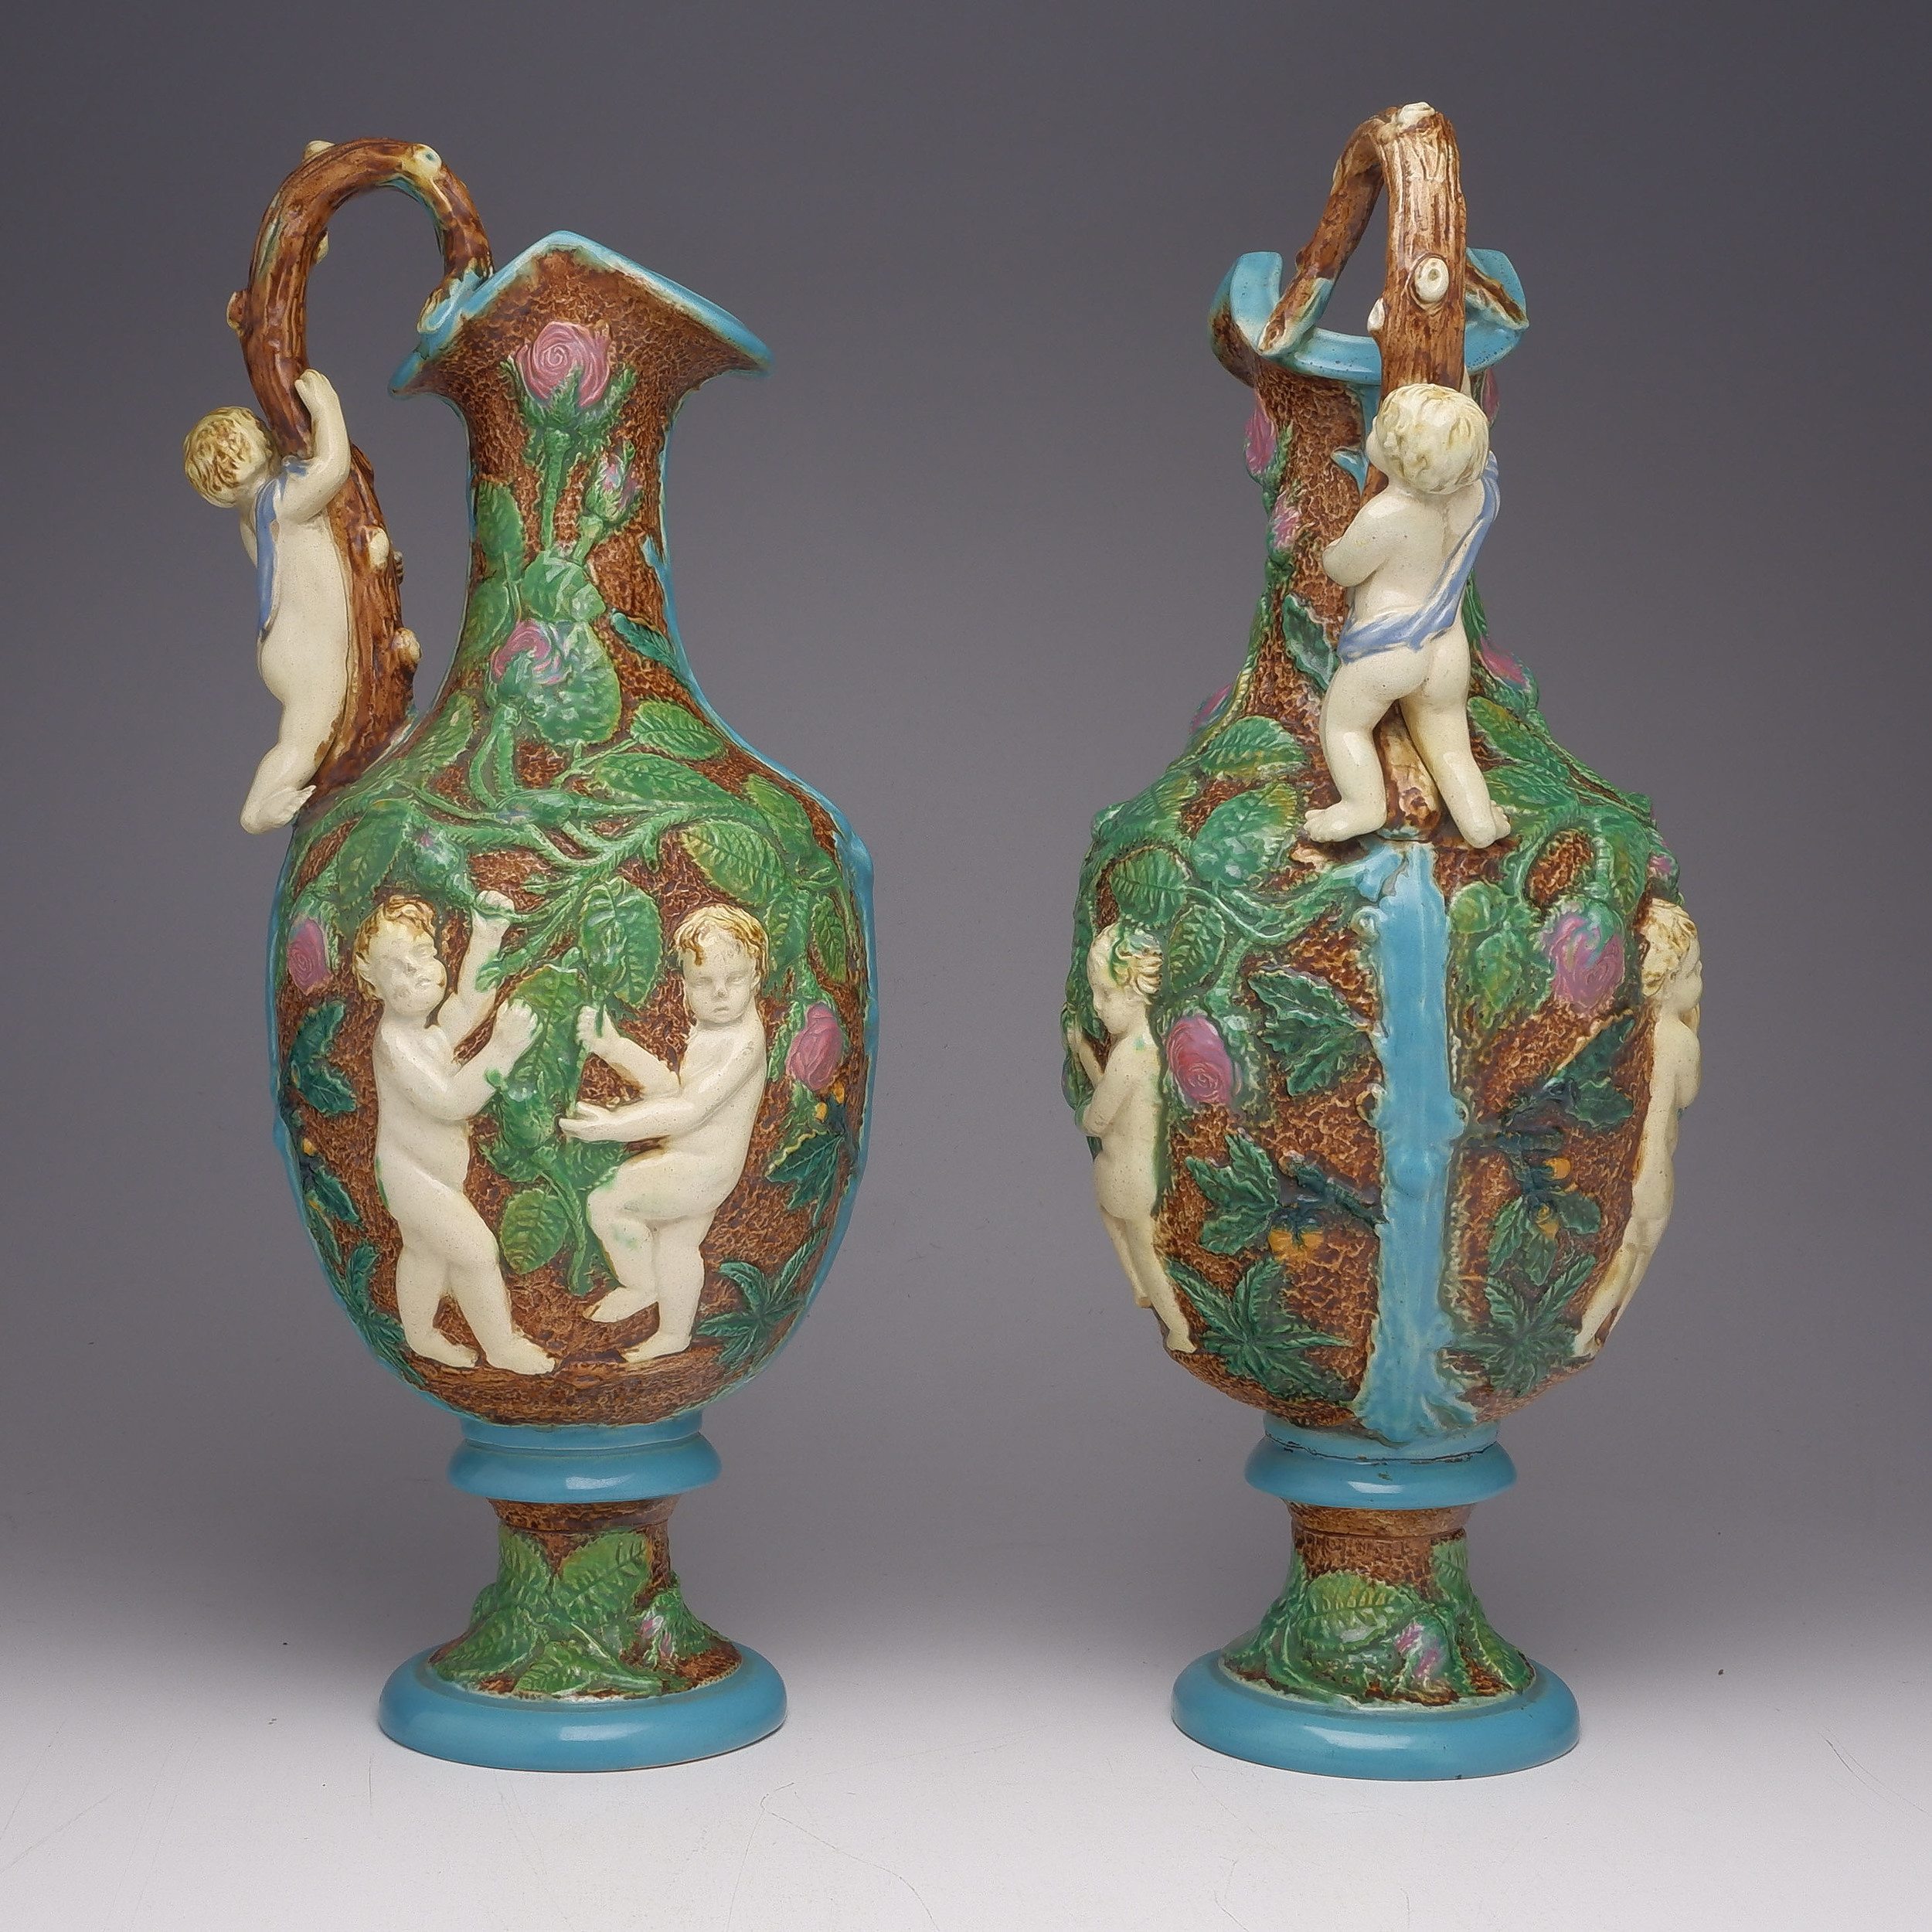 'Fine Pair of Large Victorian Majolica Ewers Moulded with Putti, England Circa 1880, Probably William Brownfield'